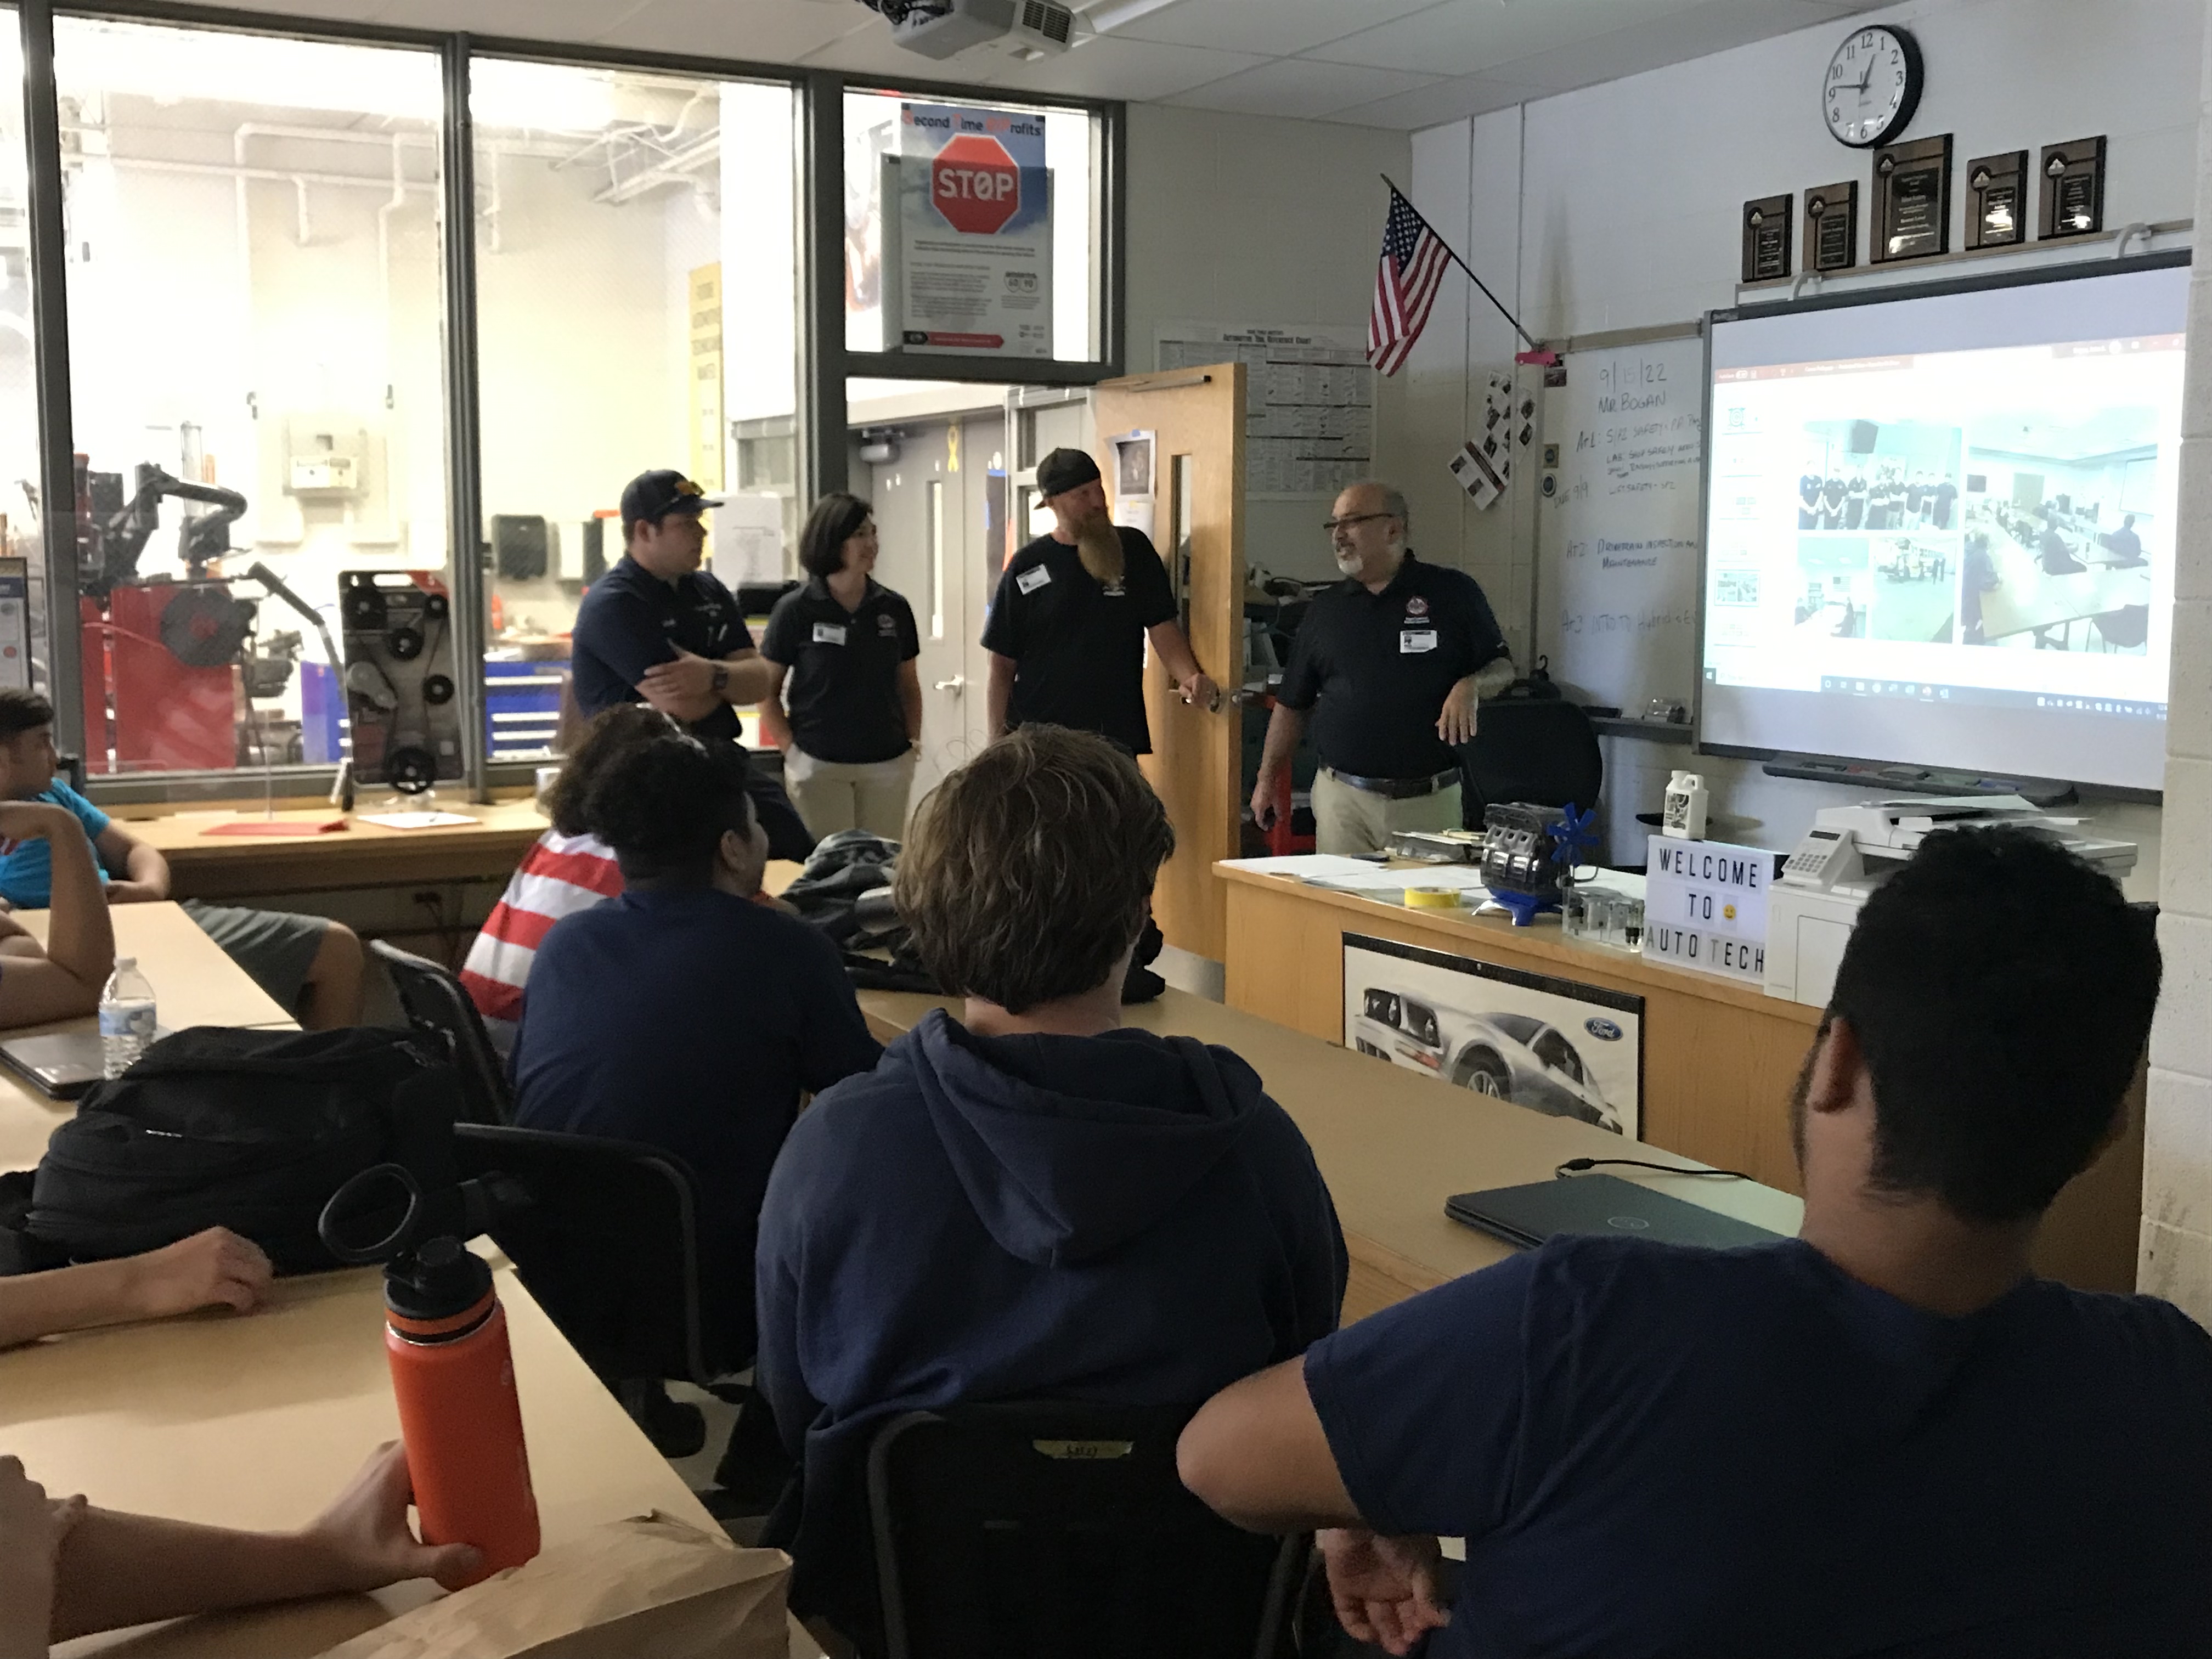 Guest speakers from Fairfax County Department of Vehicle Services in Auto Tech class